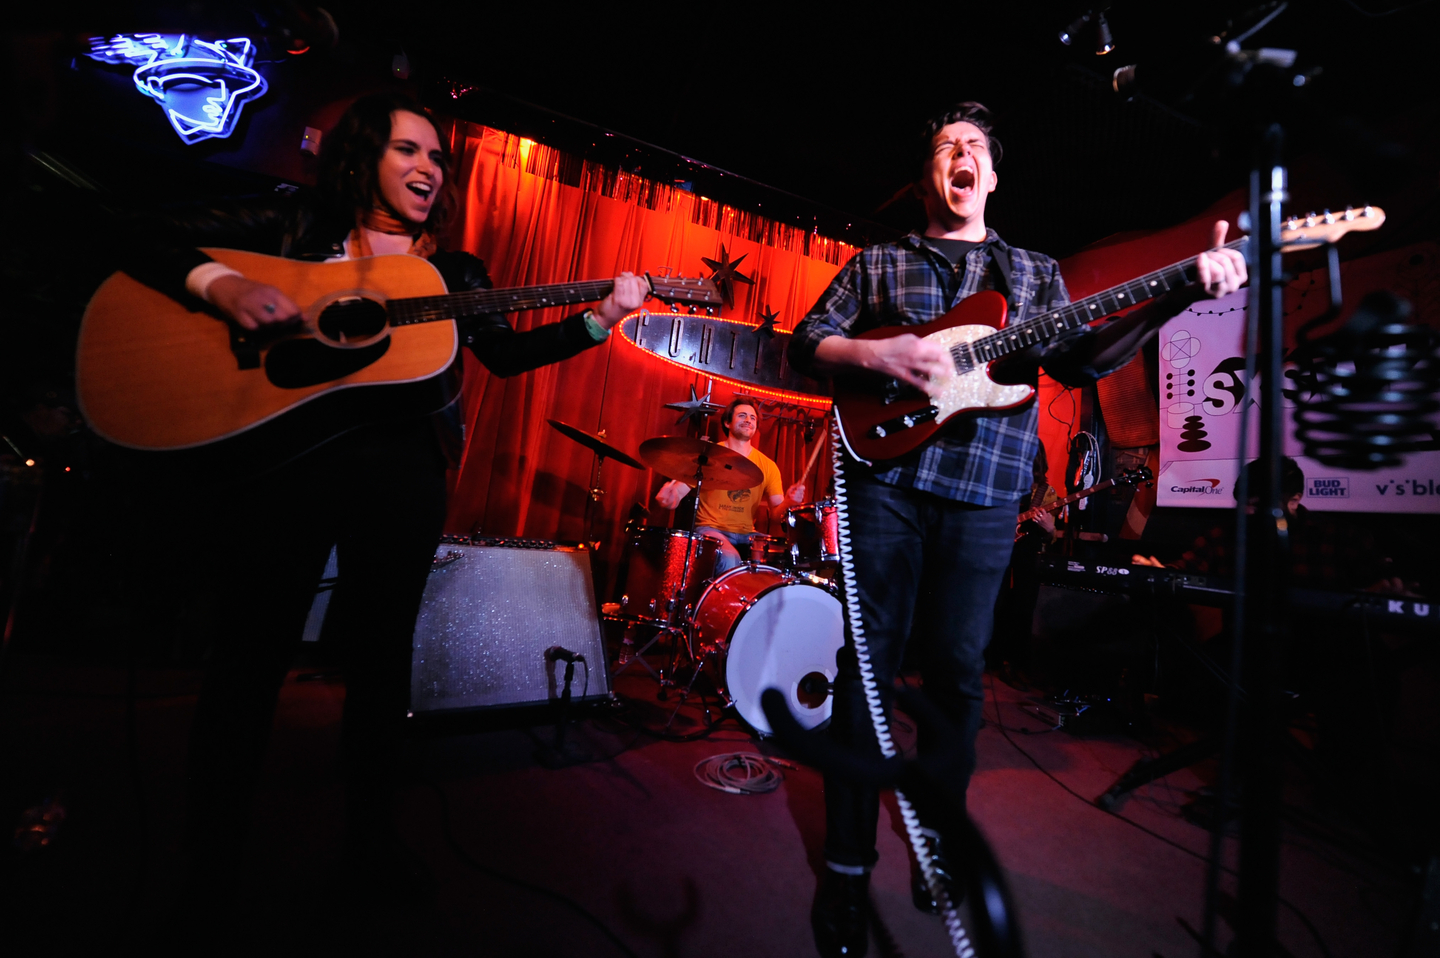 Jason Hawk Harris at Continental Club, presented by Bloodshot Records – Photo by Nicola Gell/Getty Images for SXSW